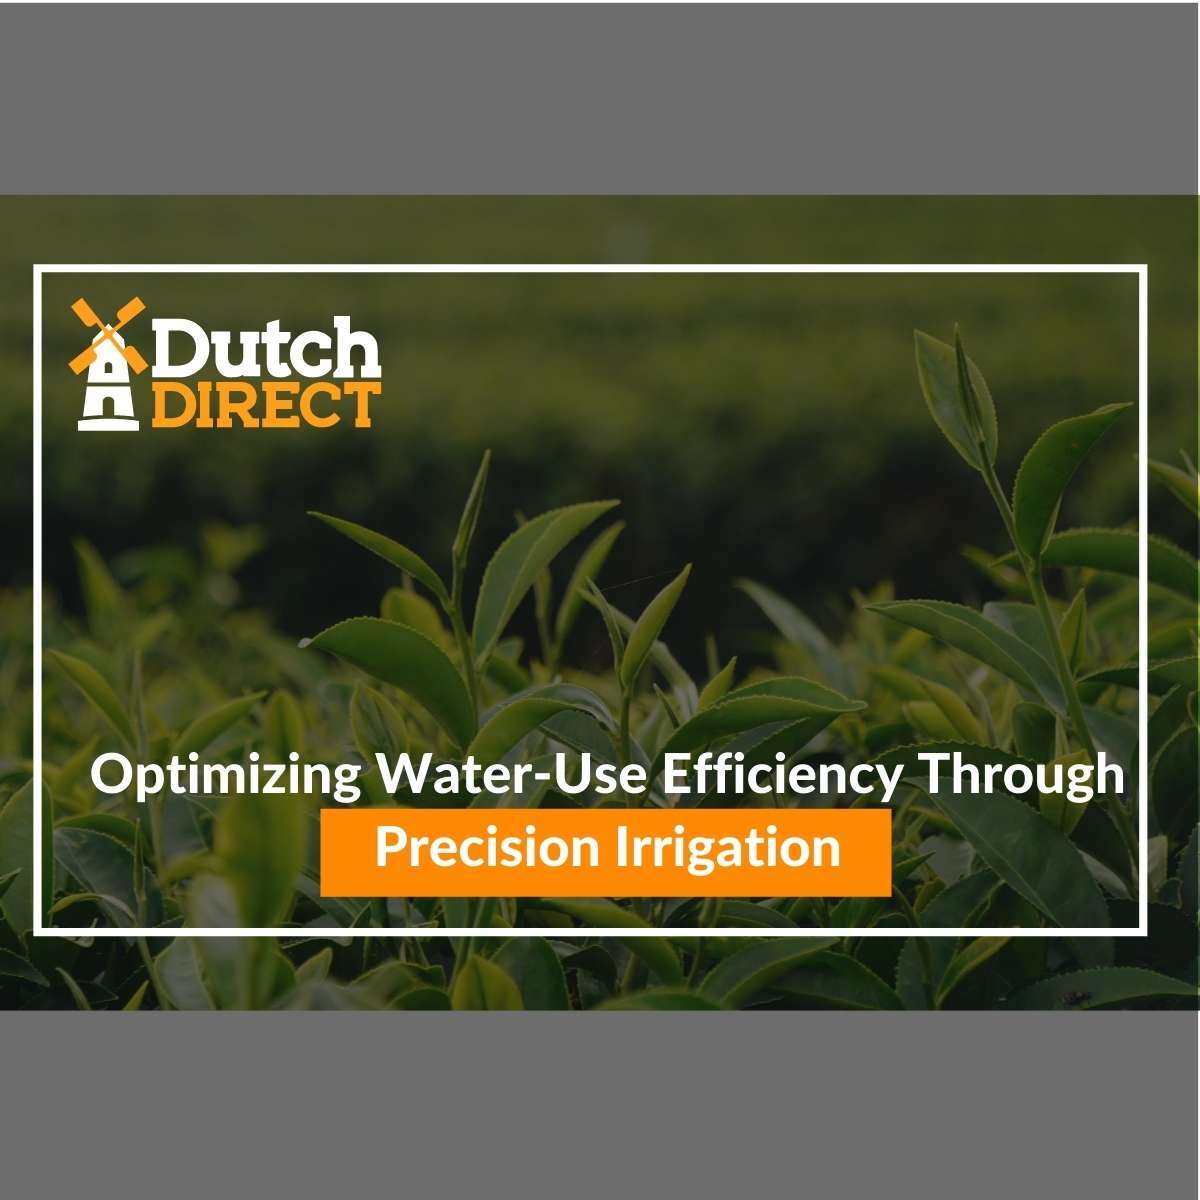 Optimizing Water-Use Efficiency Through Precision Irrigation